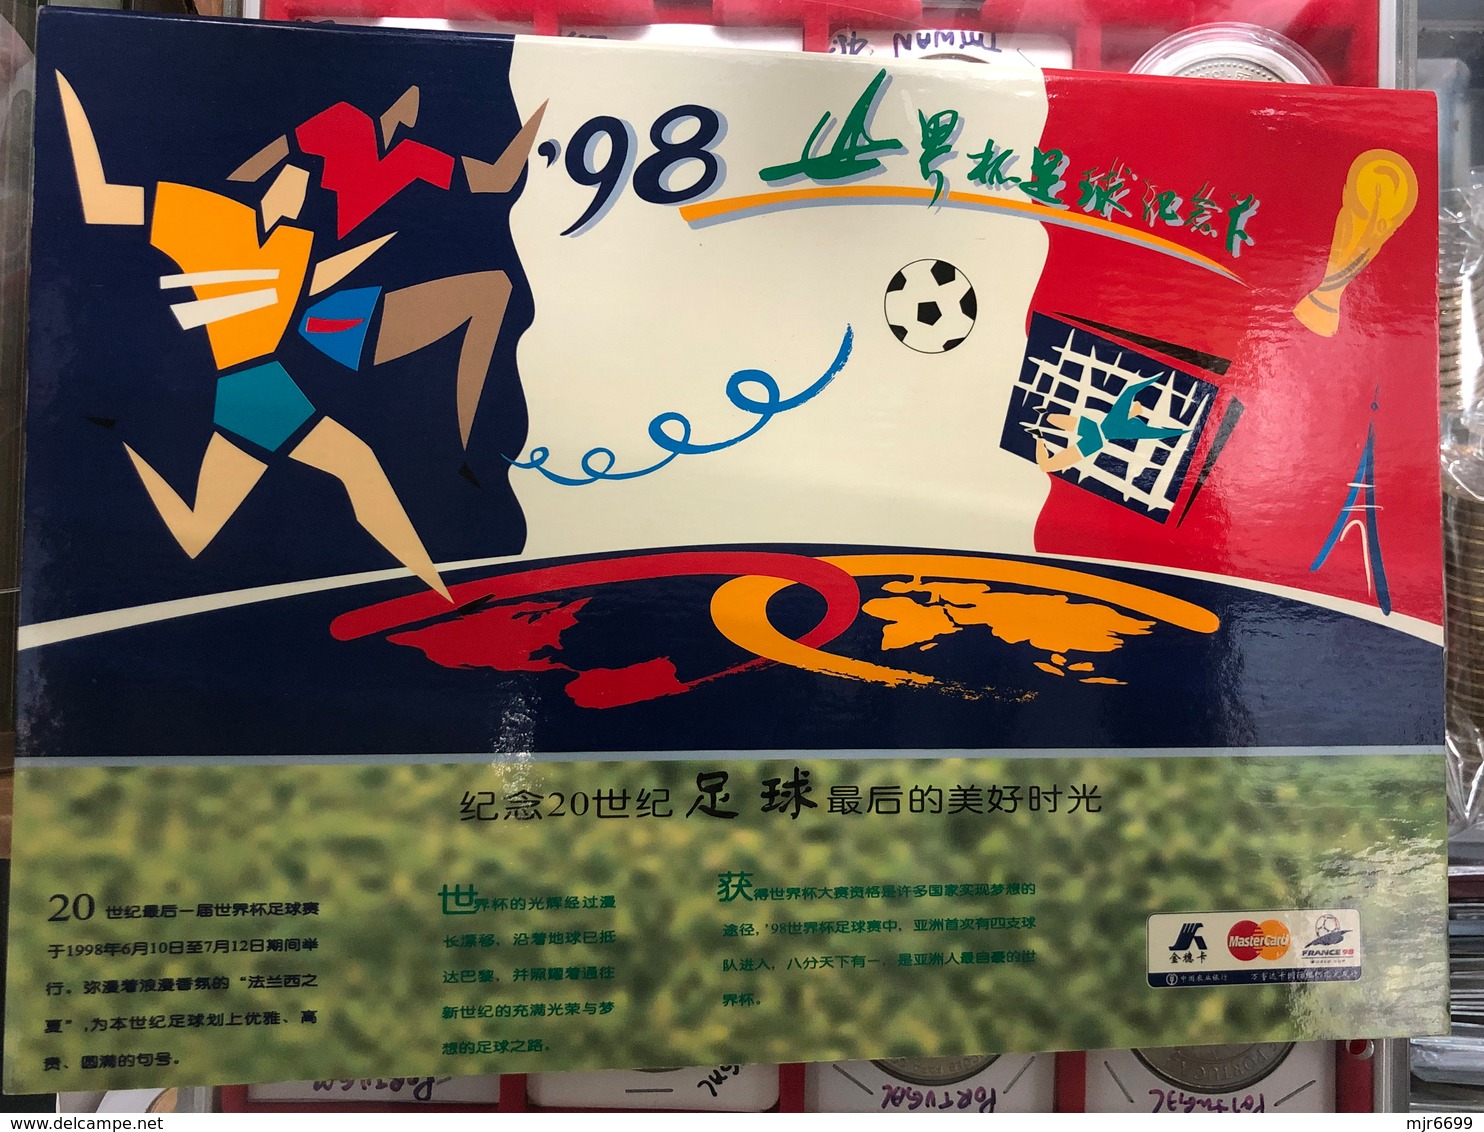 CHINA COMMEMORATING FRANCE 1998 WORLD CUP FOOTBALL CREDIT CARD BY MAESTRO\AGRICULTURAL BANK OF CHINA SET - Autres & Non Classés